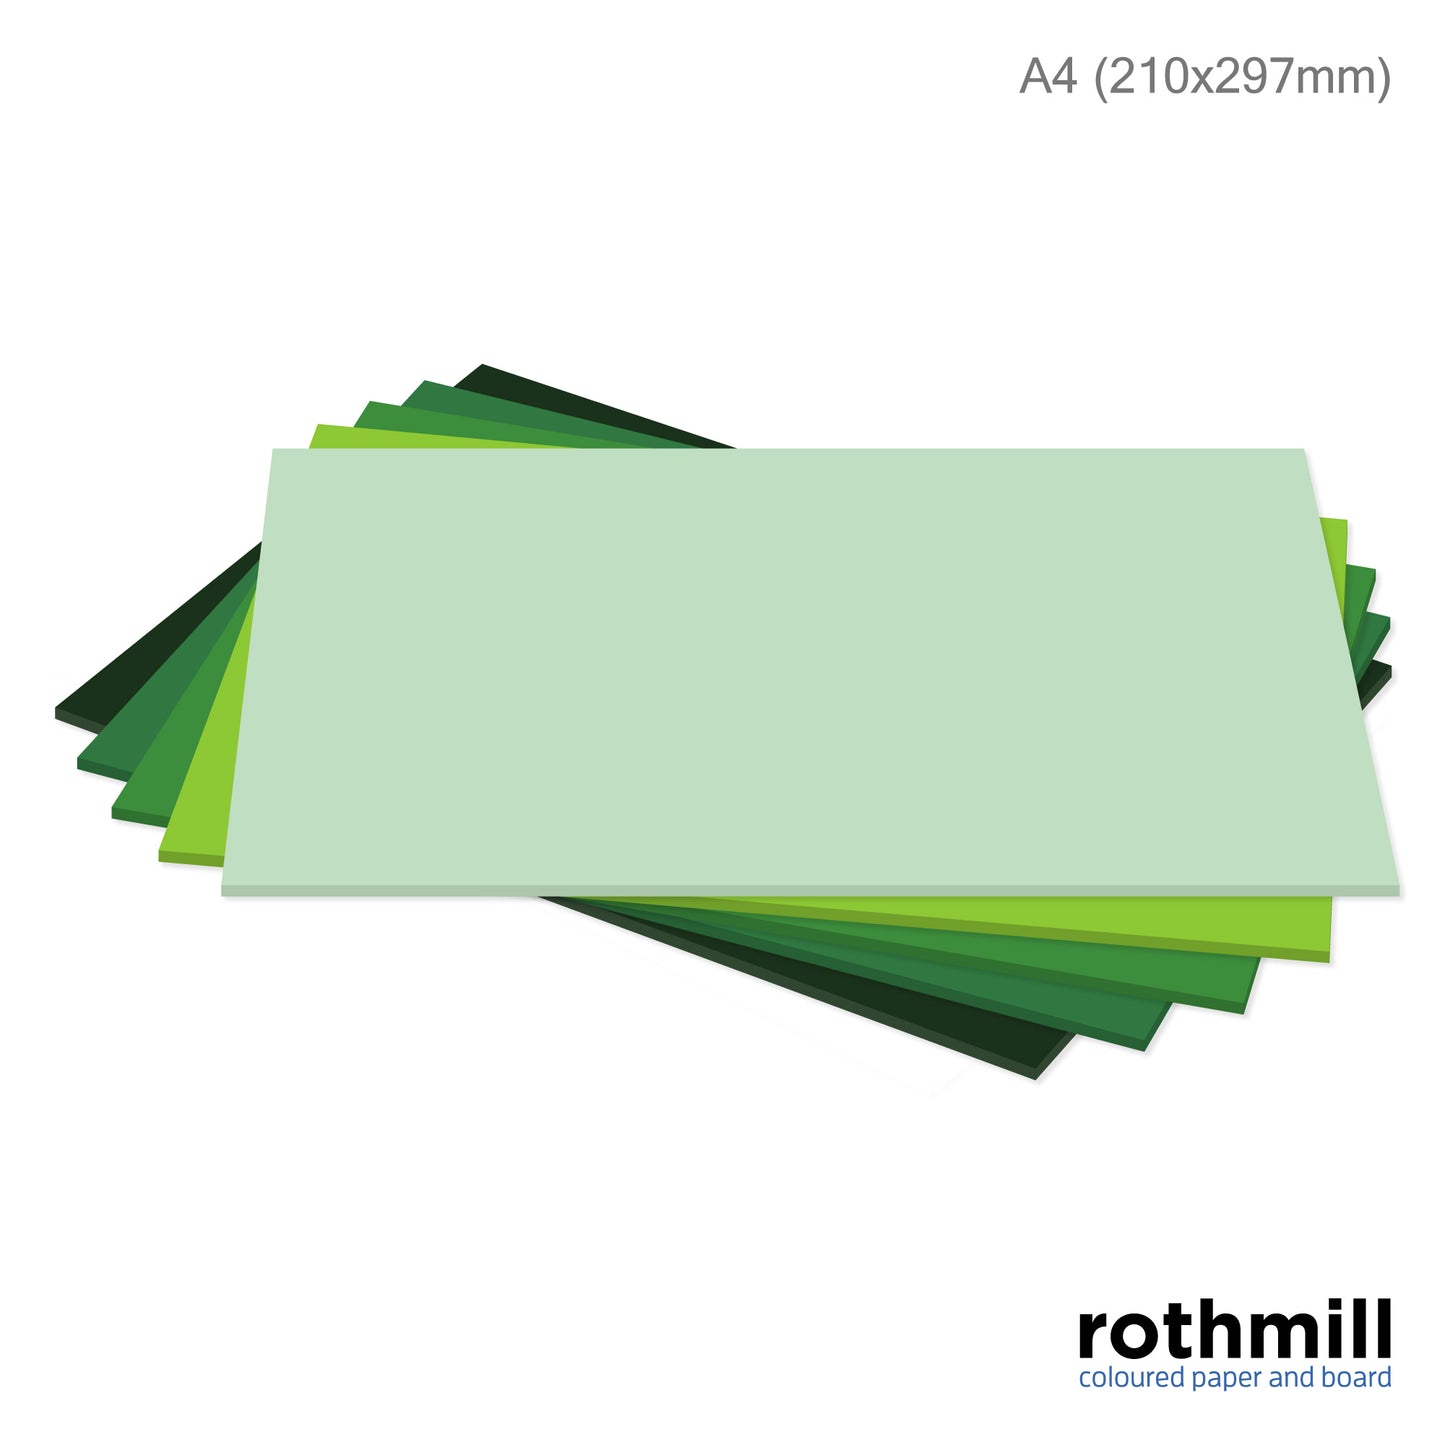 Rothmill Tone Packs | 280 microns | 220 gsm | A4 (210x297mm) | 50 sheets | Available in 7 different Assortments